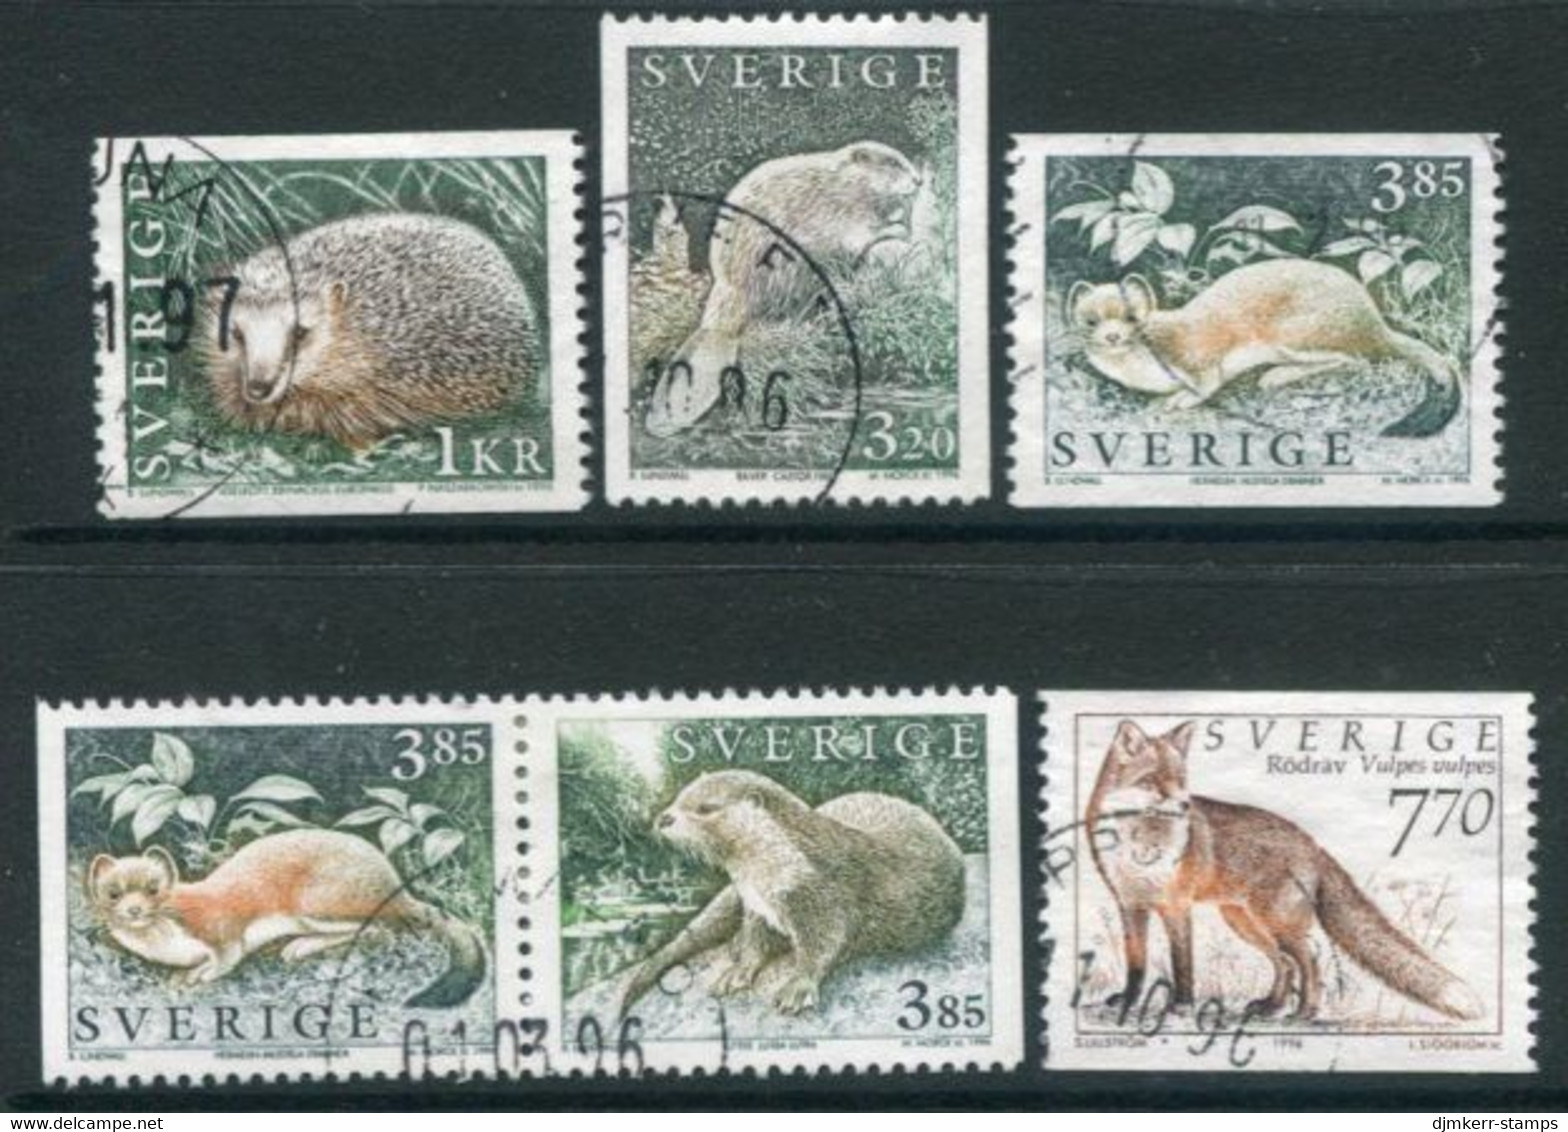 SWEDEN 1996 Wild Mammals Used  Michel 1925-29 - Used Stamps